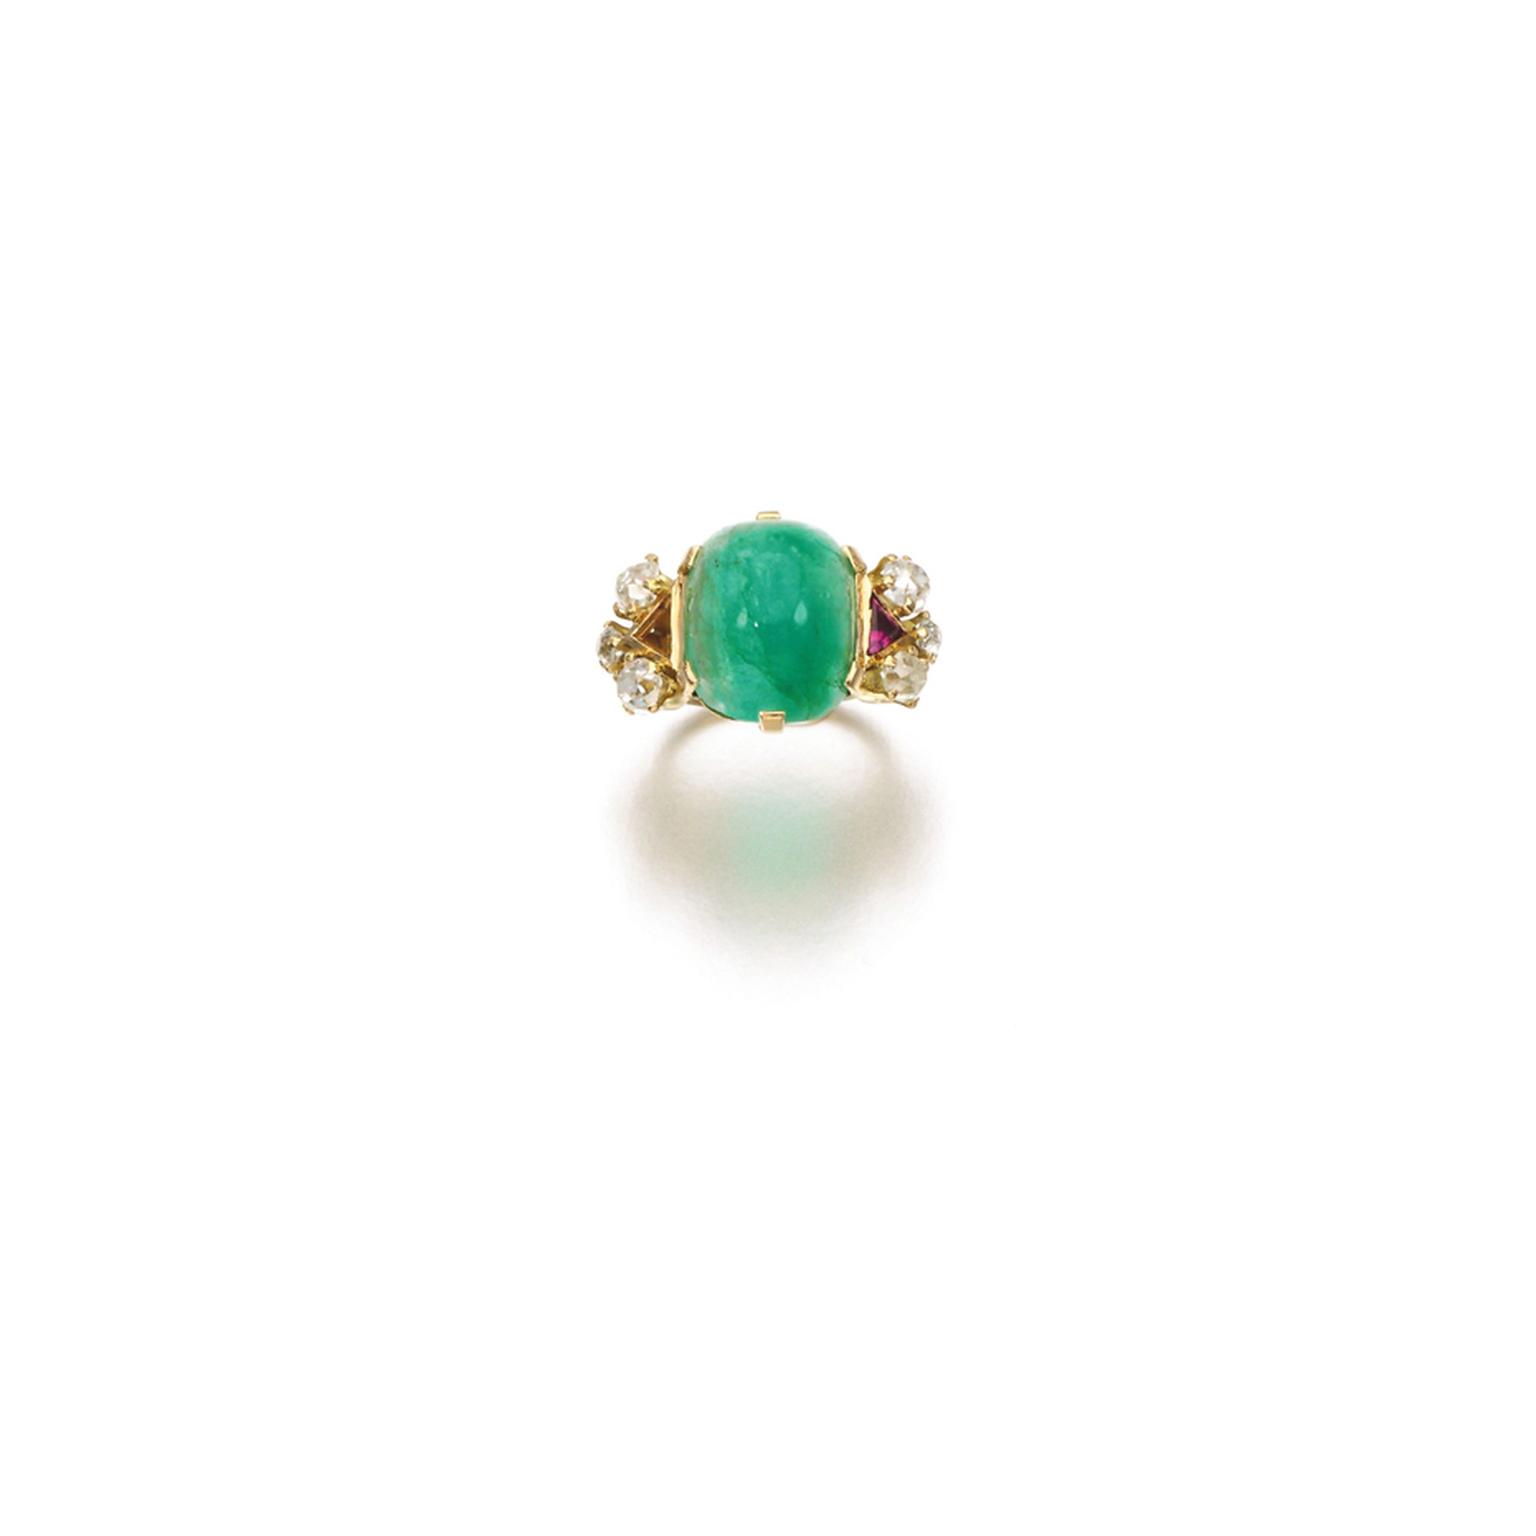 Lot 102, from the Daisy Fellowes collection, an emerald, ruby and diamond ring featuring a sugarloaf cabochon emerald set between triangular ruby shoulders, further decorated with circular-cut diamonds - one ruby deficient (estimate: £3,000-5,000; unsold)